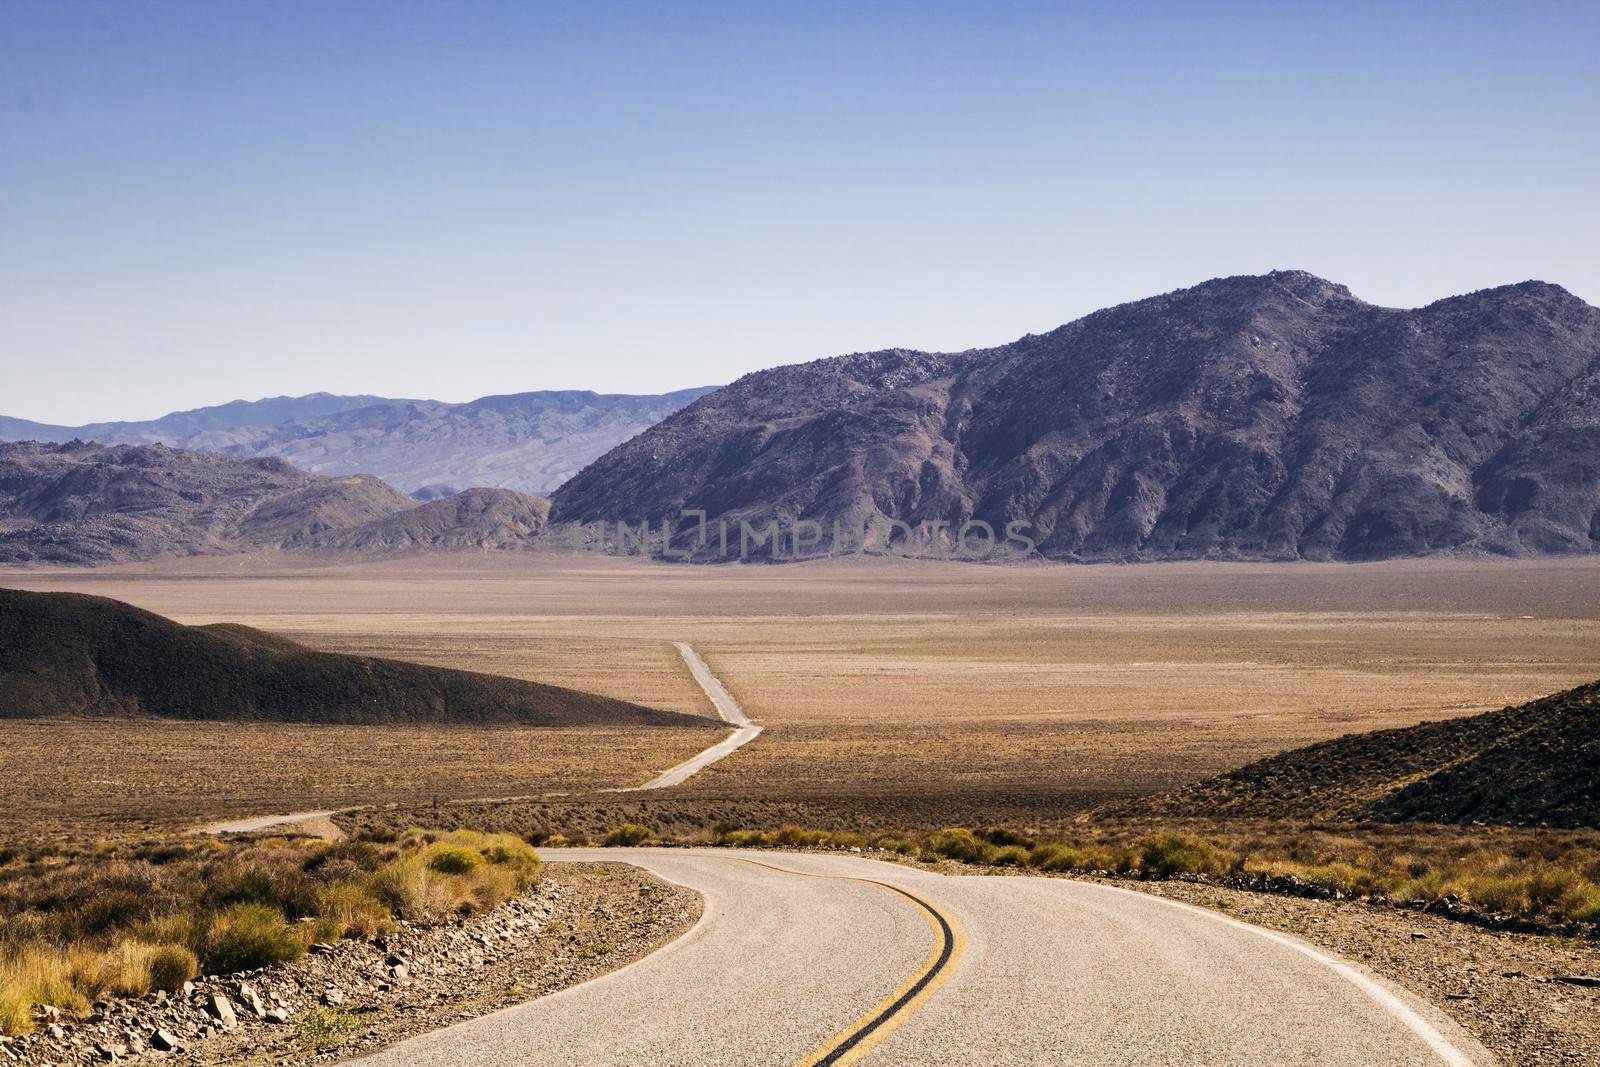 Curved road crossing a desert area in California